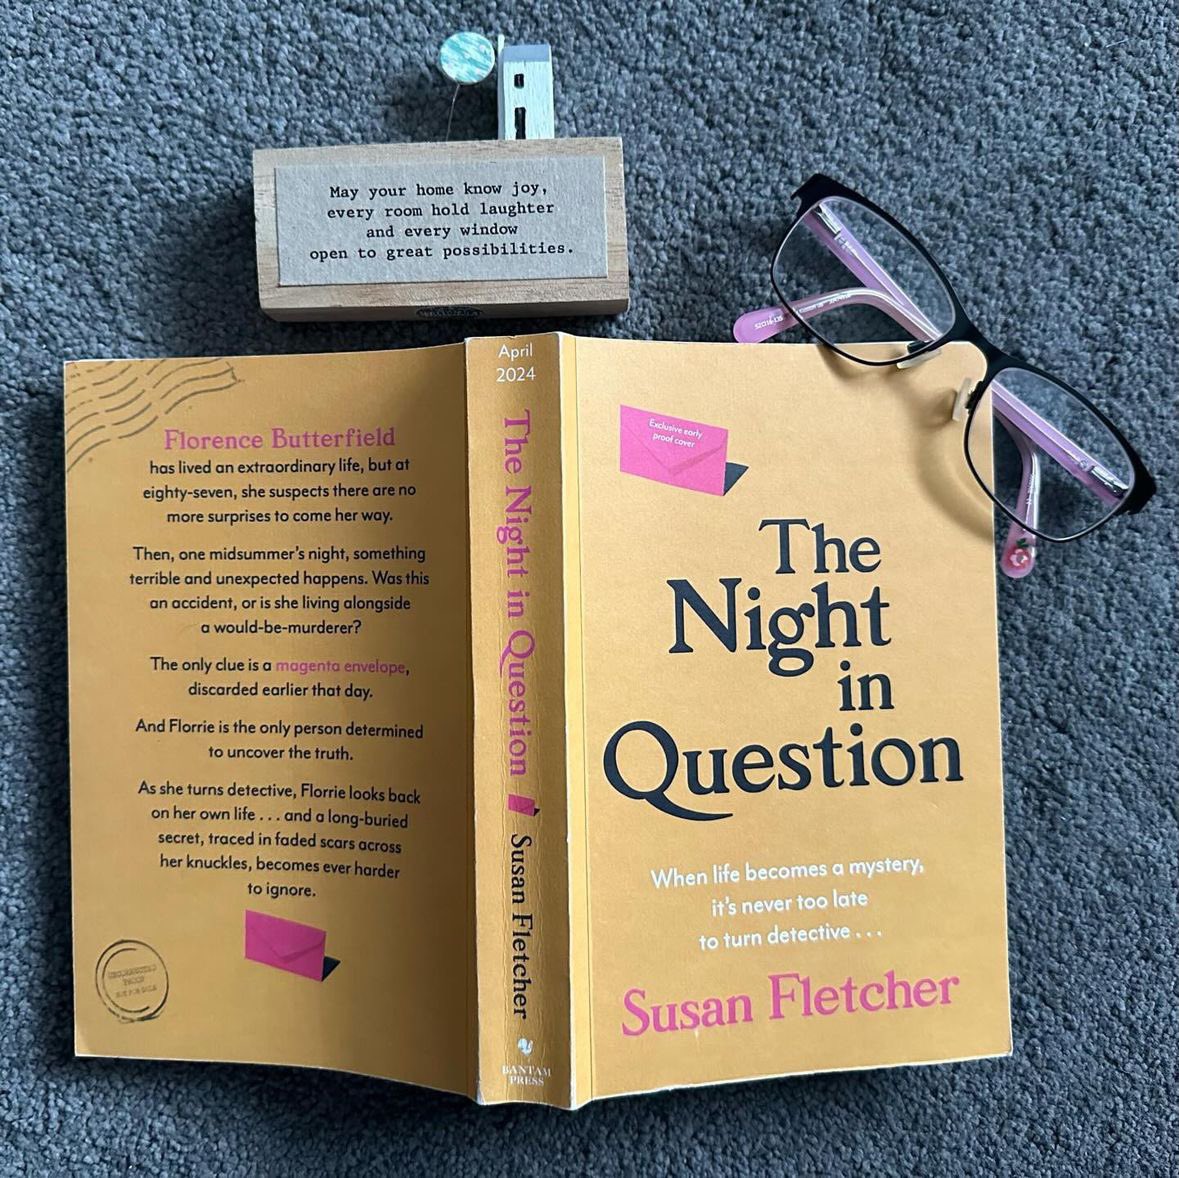 📚#PUBLICATIONDAY📚

4⭐️ Also out today is the wonderful #TheNightInQuestion by @sfletcherauthor 

Meet Florrie Butterfield, the 87 year old with a zest for life who turns detective overnight!🔎 She’s just fab!😍

Full Review 🔗 shorturl.at/hPWY3

#BookTwitter #Bookblogger